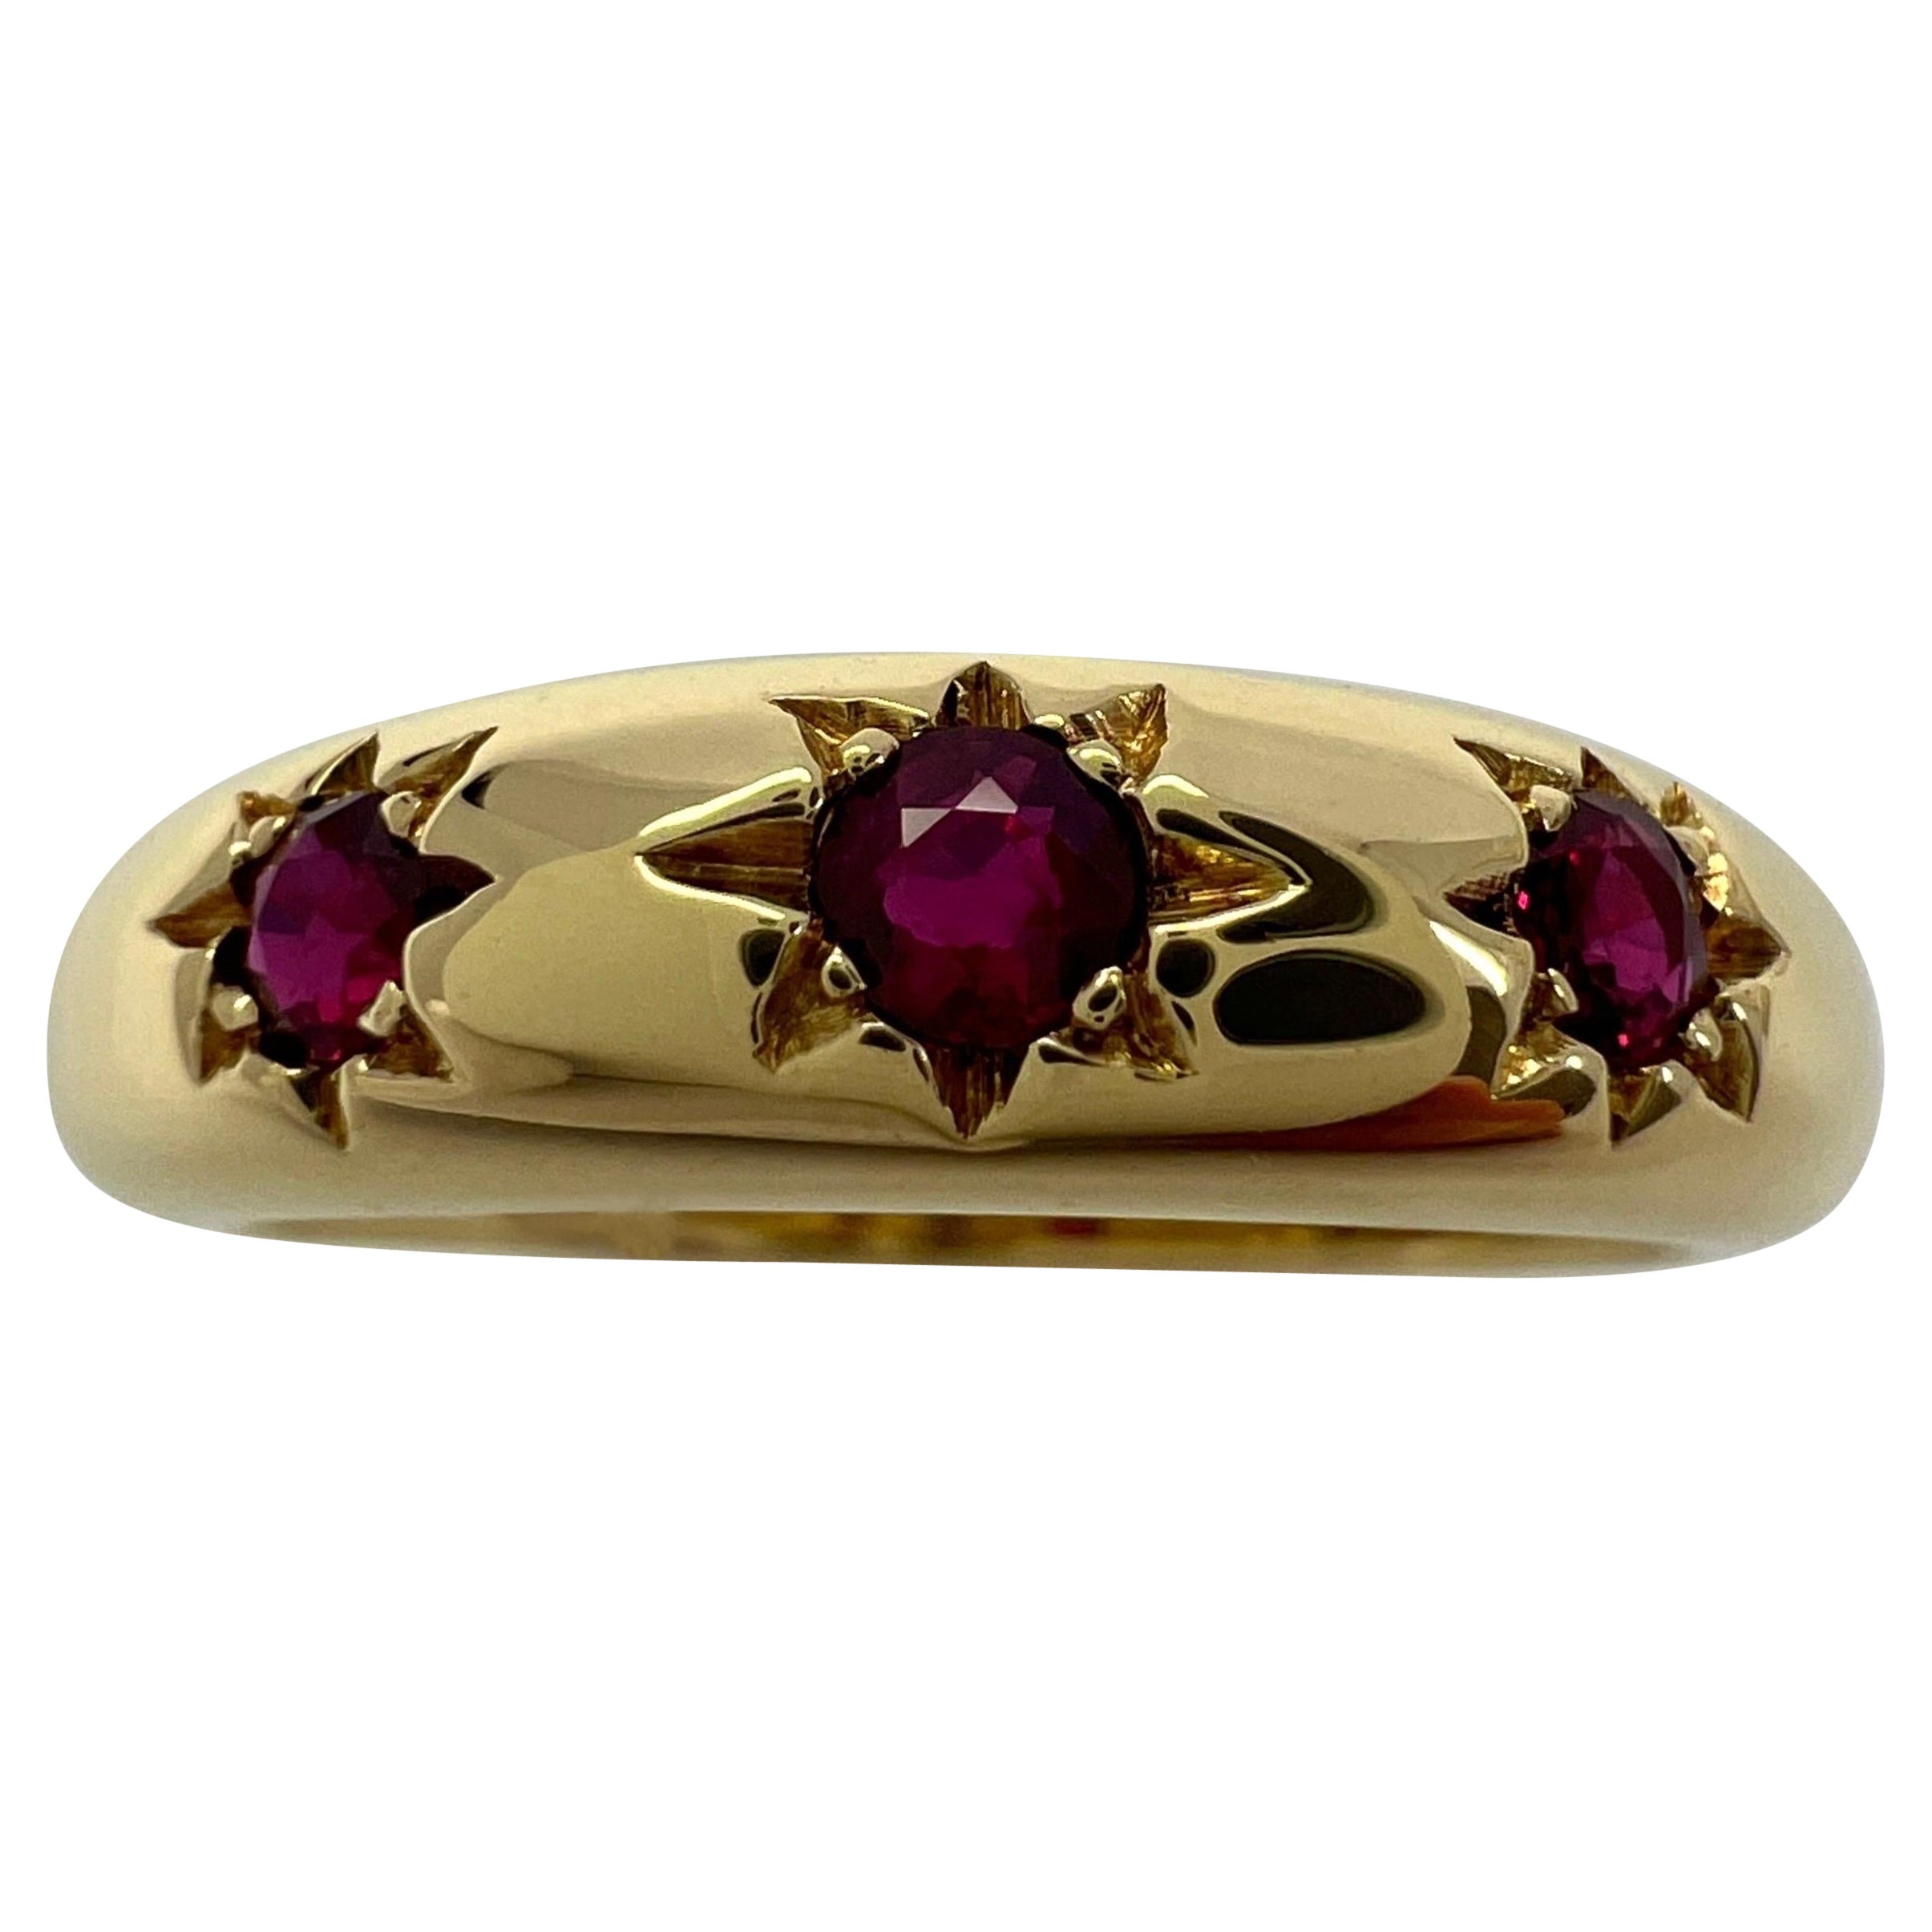 Rare Vintage Van Cleef & Arpels Star Set Ruby 18k Yellow Gold Three Stone Ring For Sale